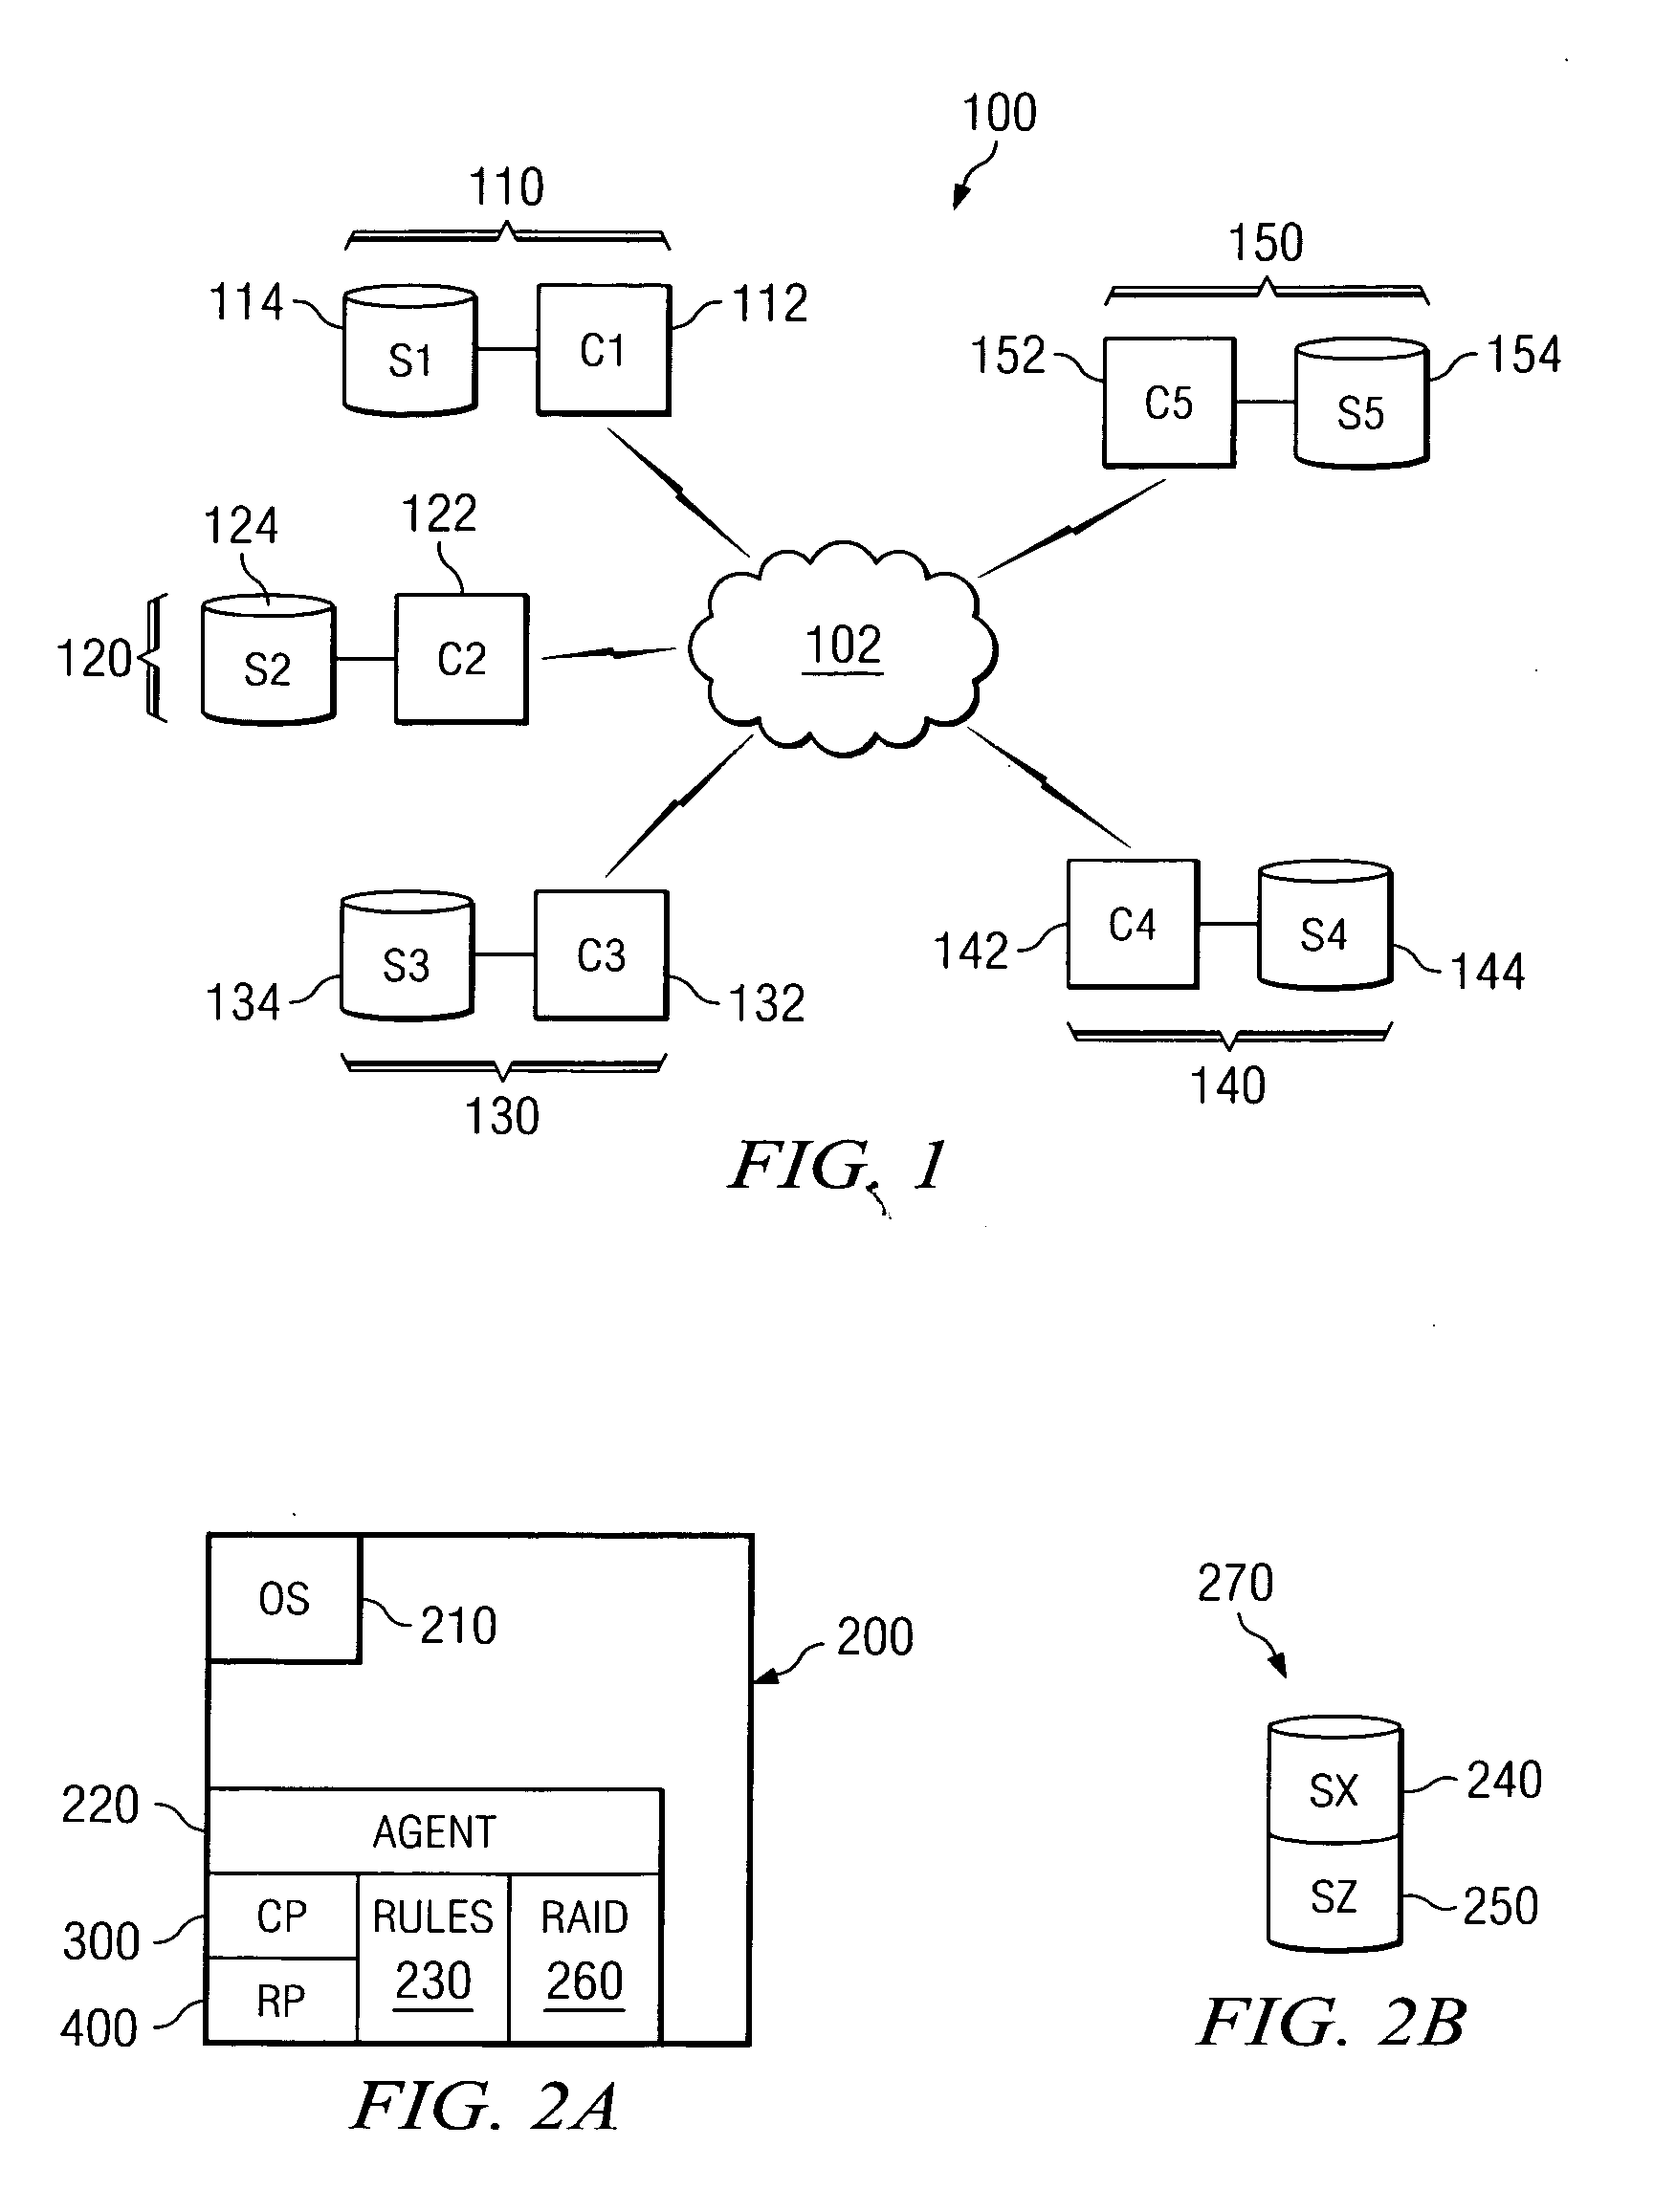 System and method for an on-demand peer-to-peer storage virtualization infrastructure